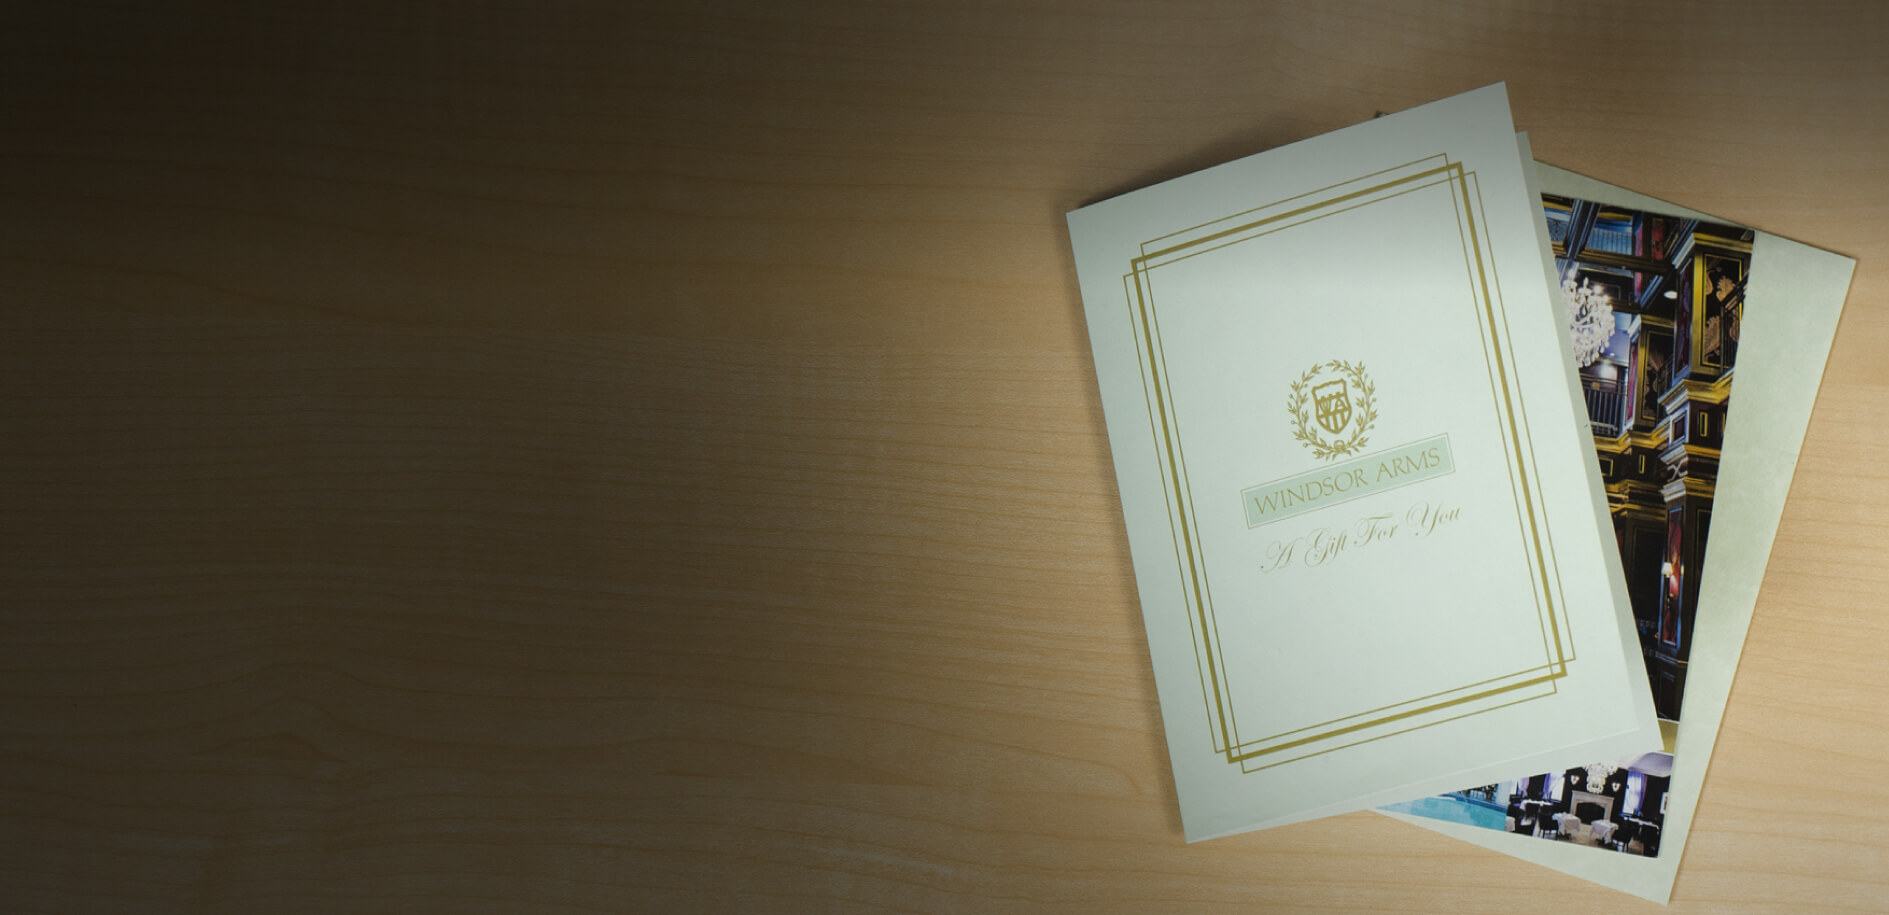 Windsor Arms Hotel giftcard